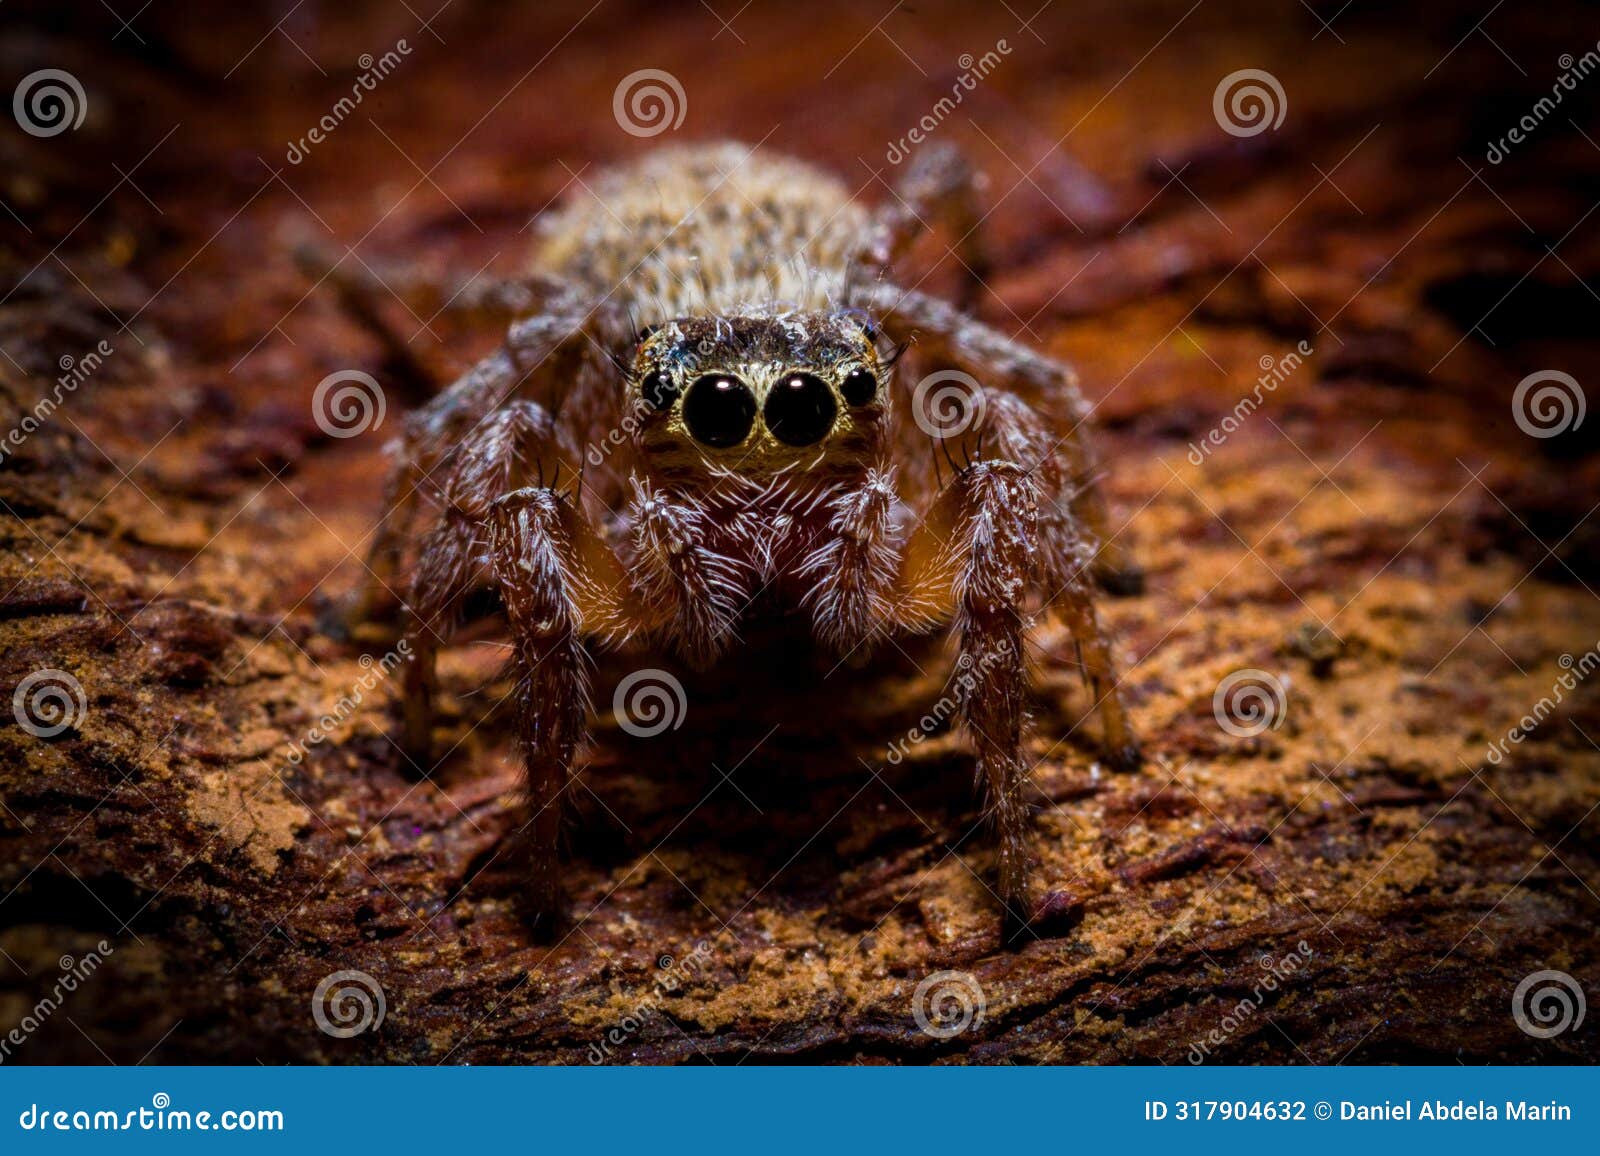 macrophotography of jumping spider on a tree bark.